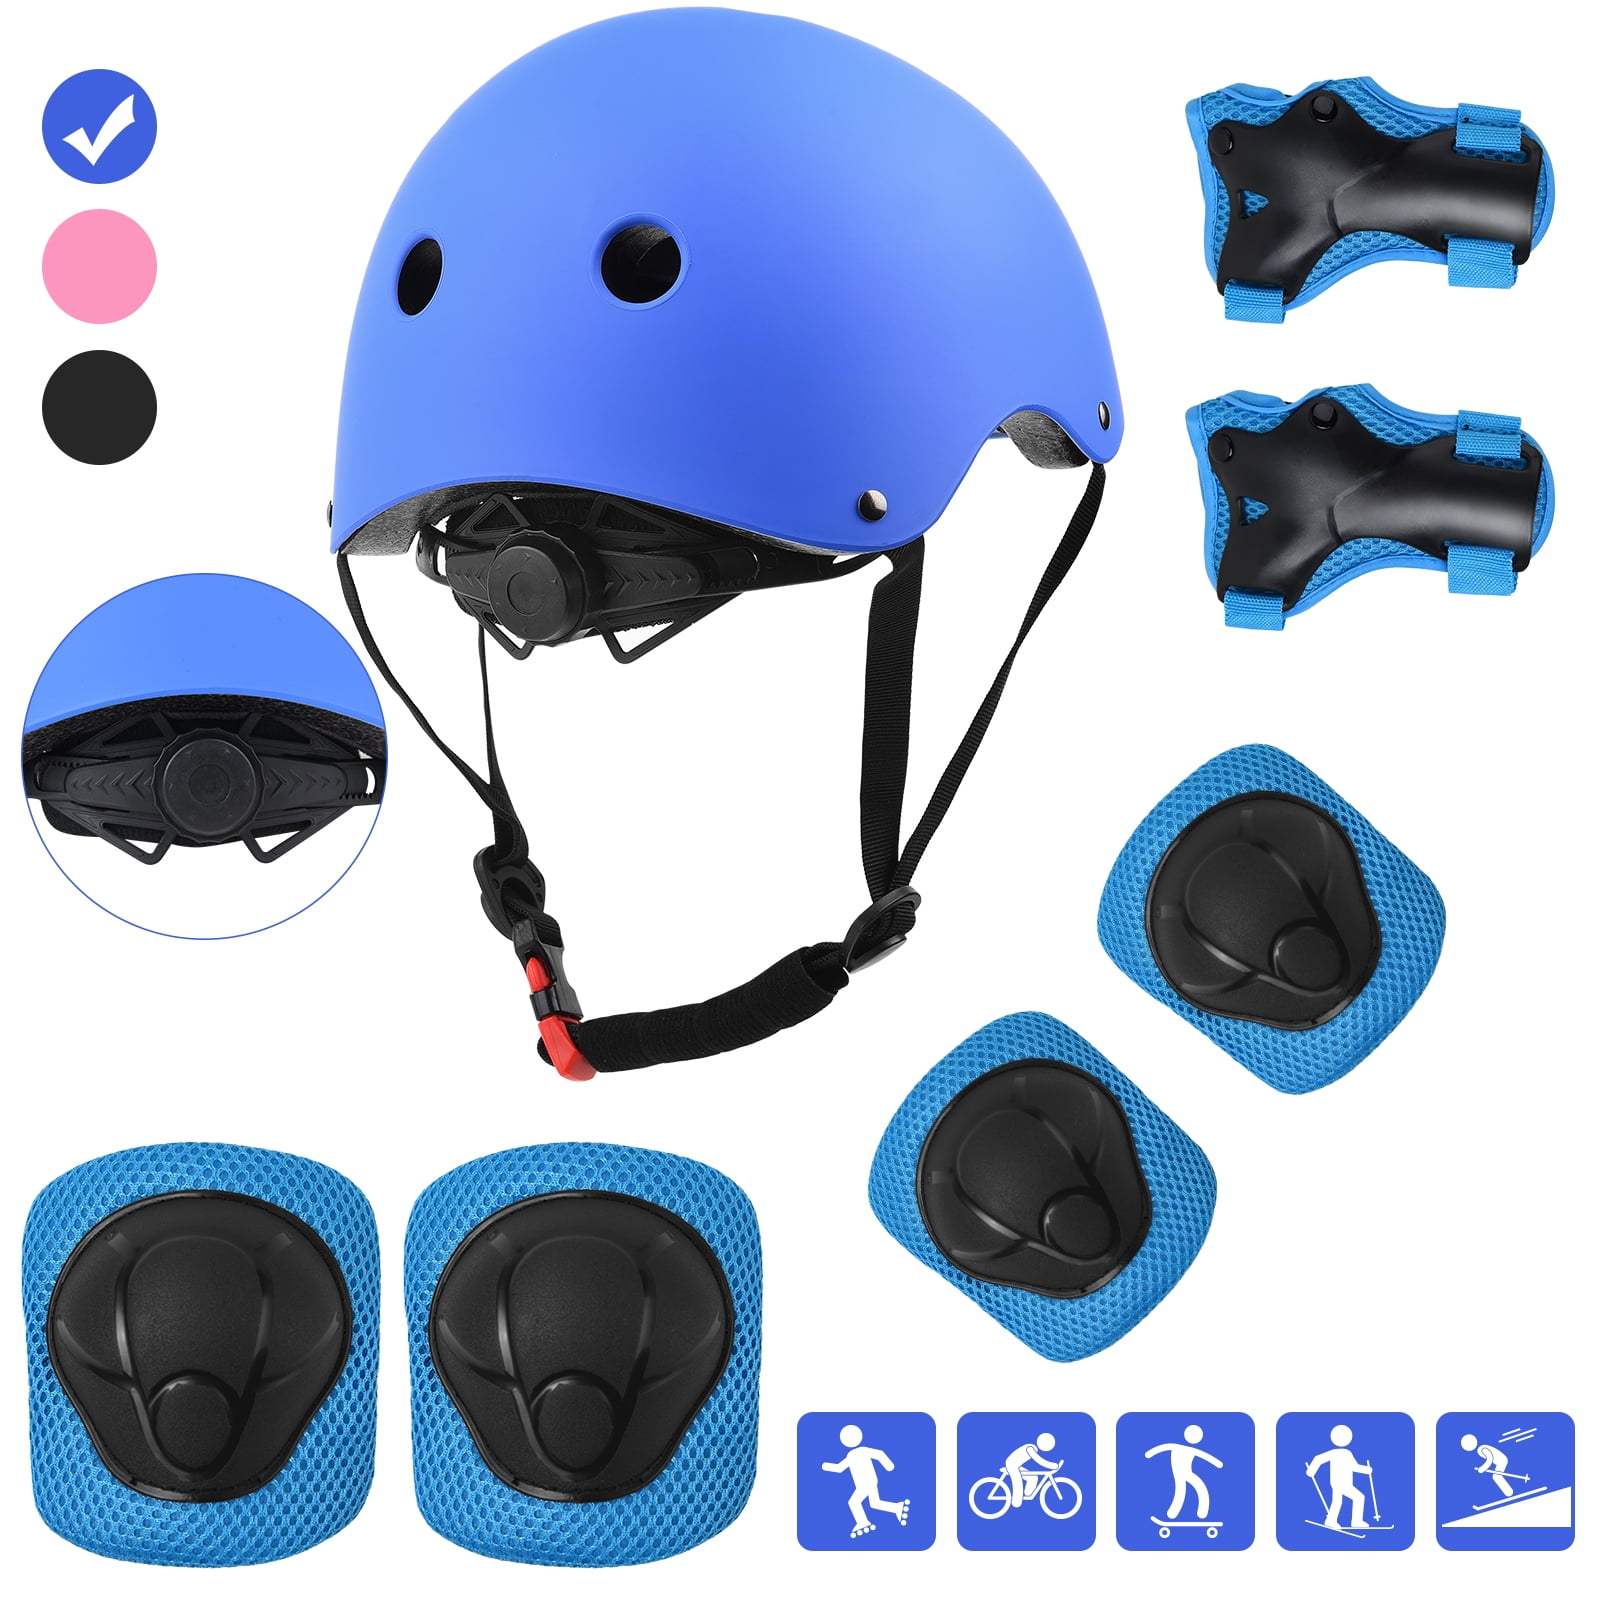 Full Face Helmet Kids Outdoor Sports Scooter Bicycle Skateboard Safety Protect 